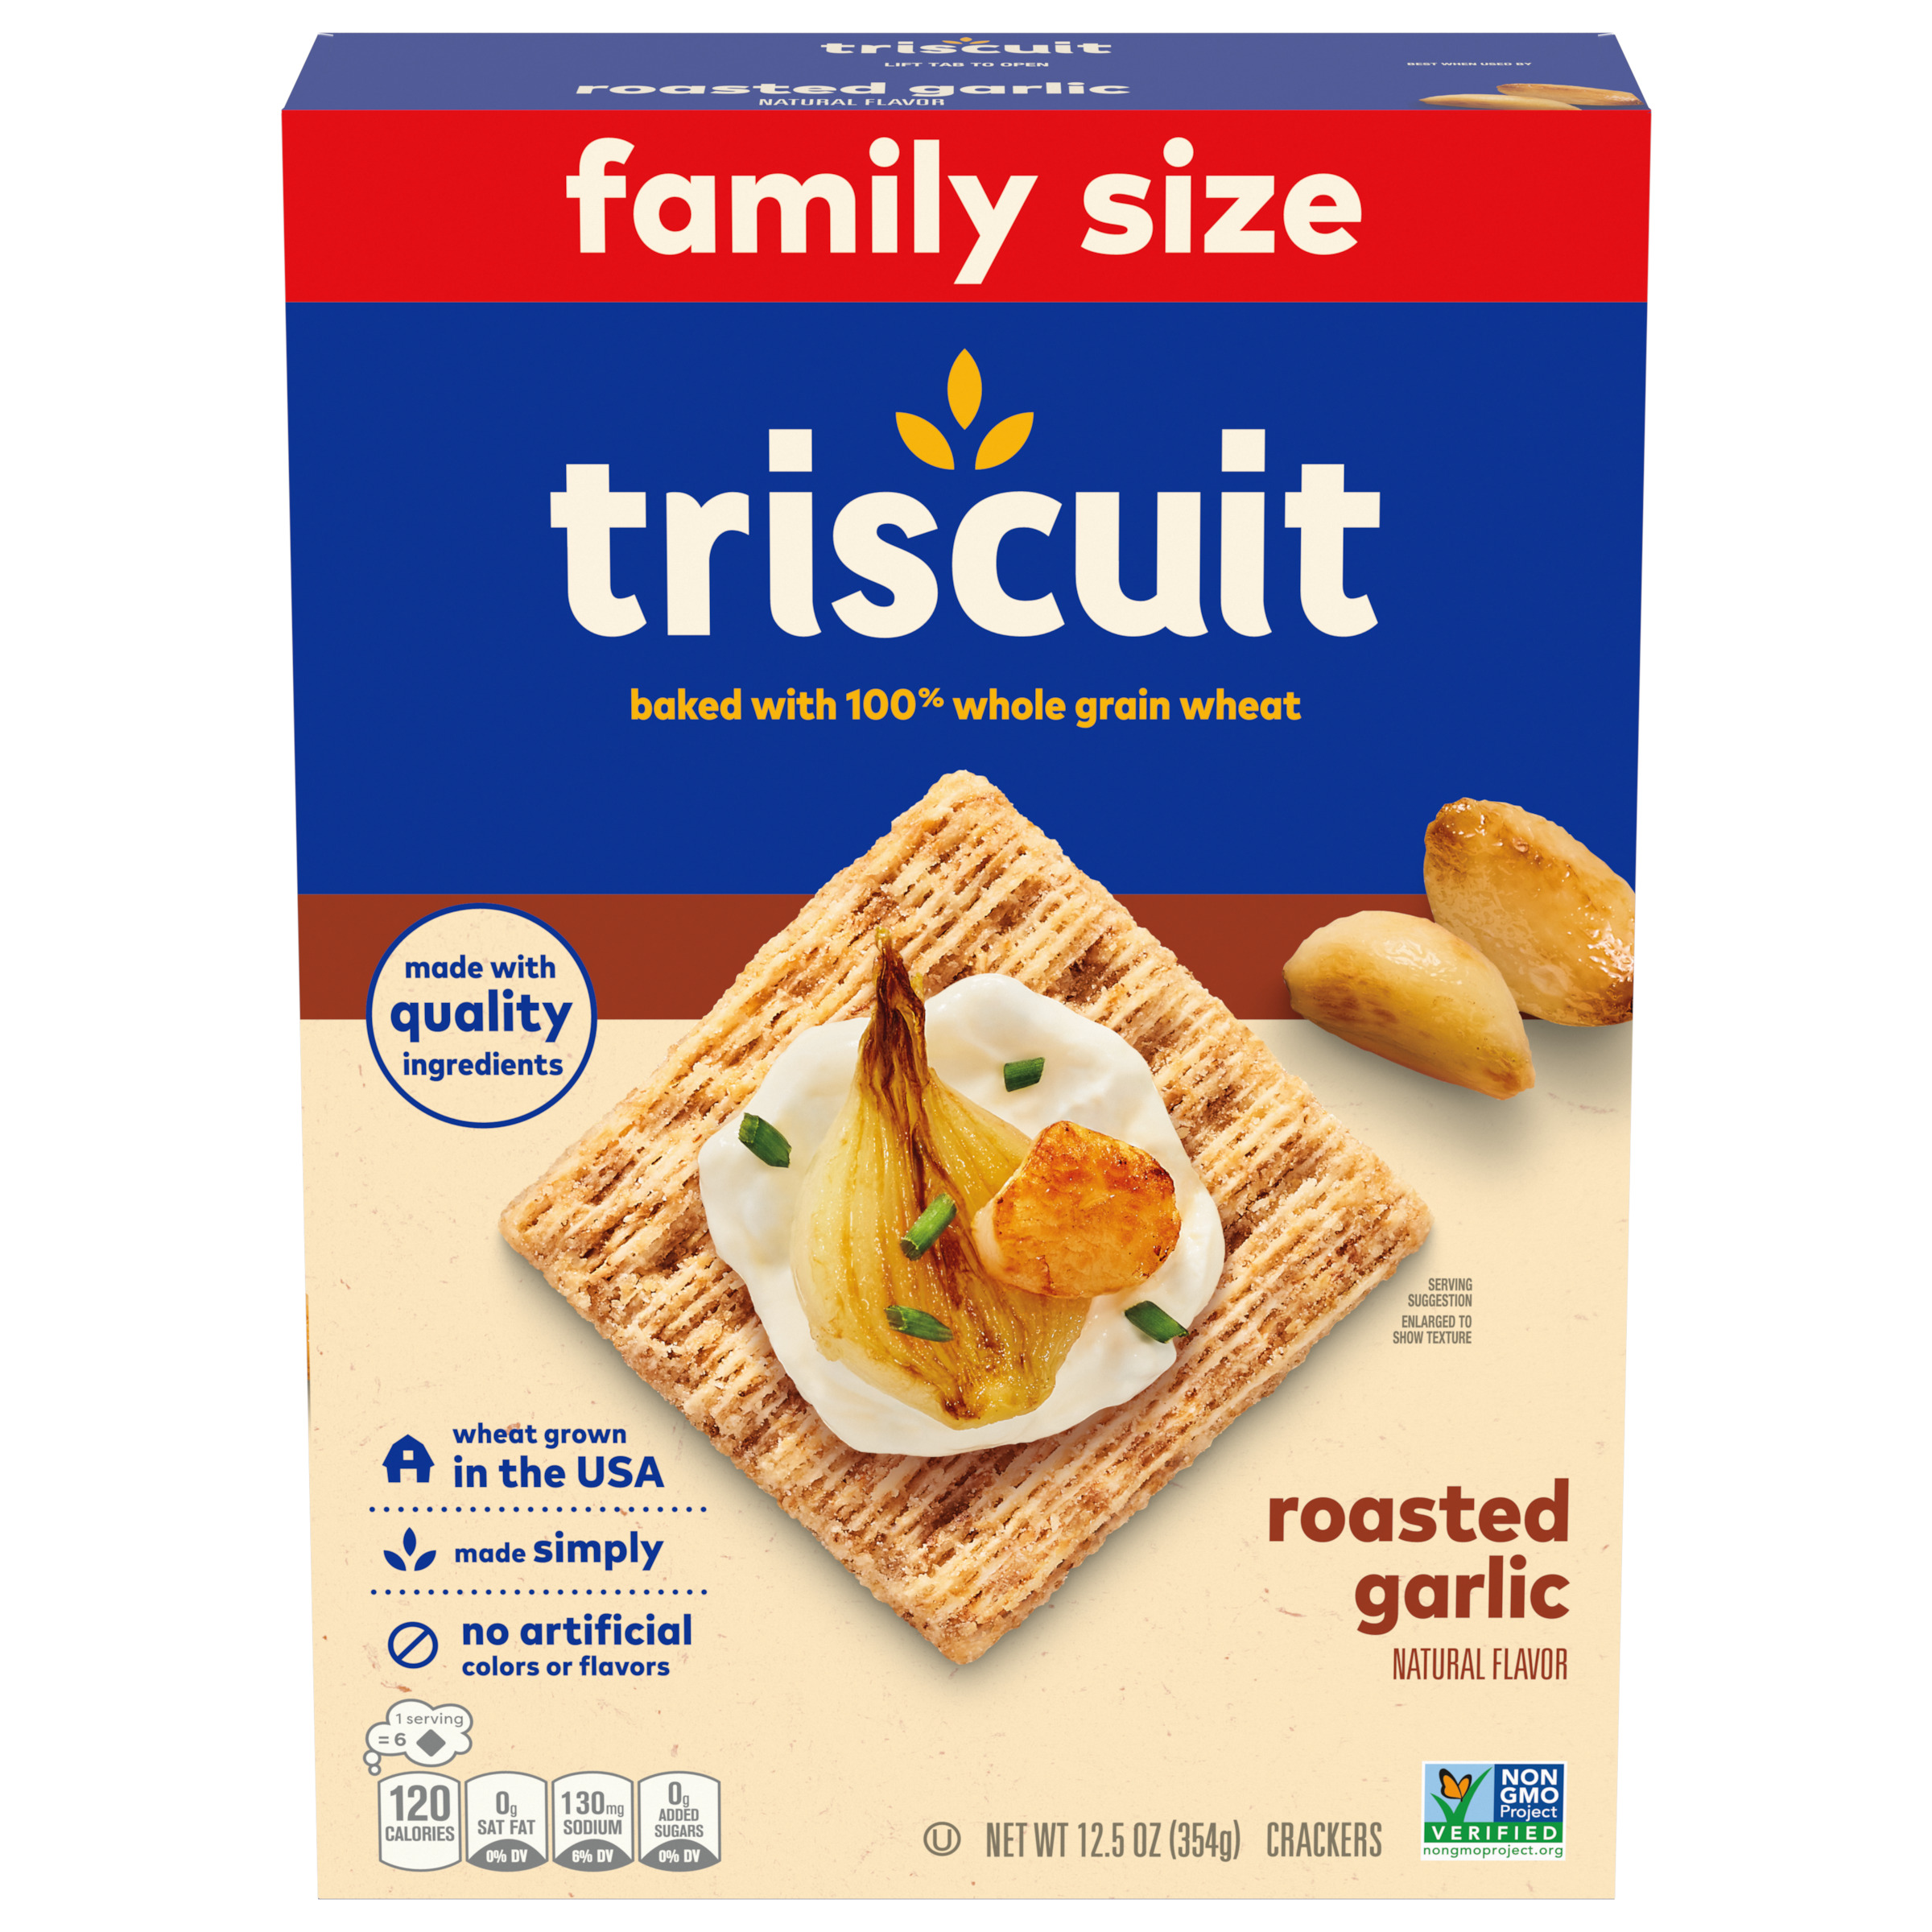 Triscuit Roasted Garlic Whole Grain Wheat Crackers, Family Size, 12.5 oz-1